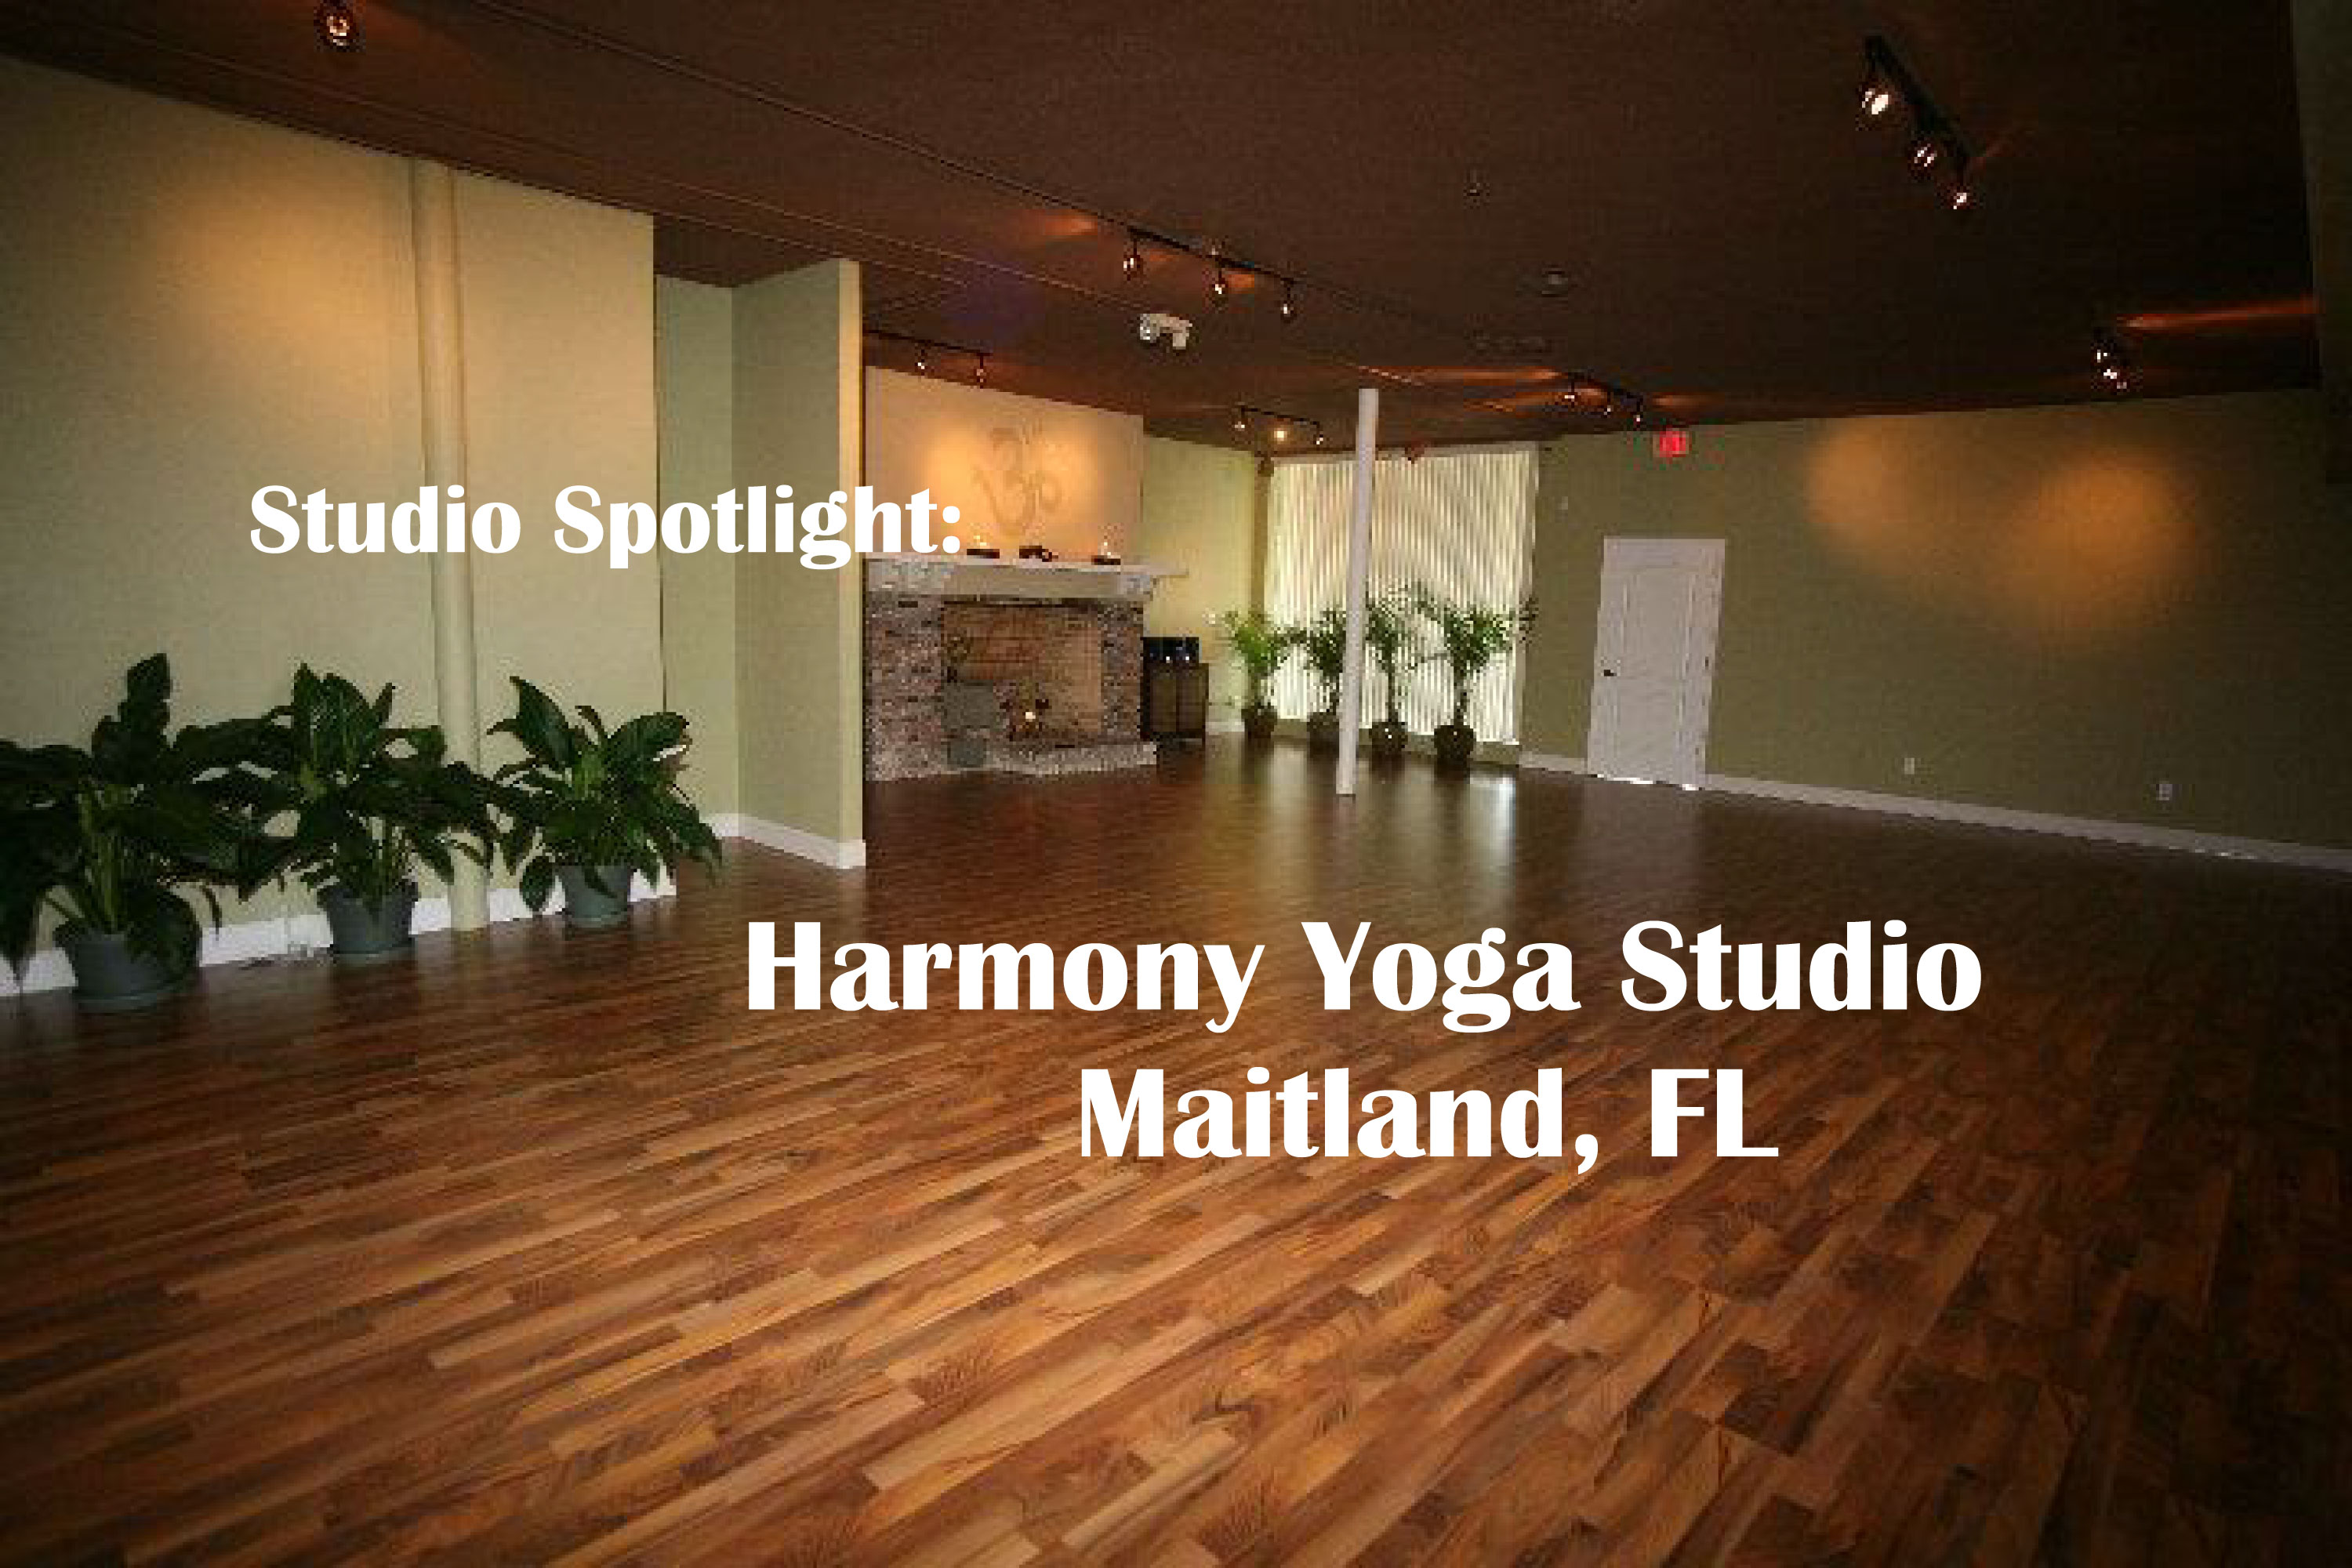 Harmony Yoga Studio: A Space For Love and Healing